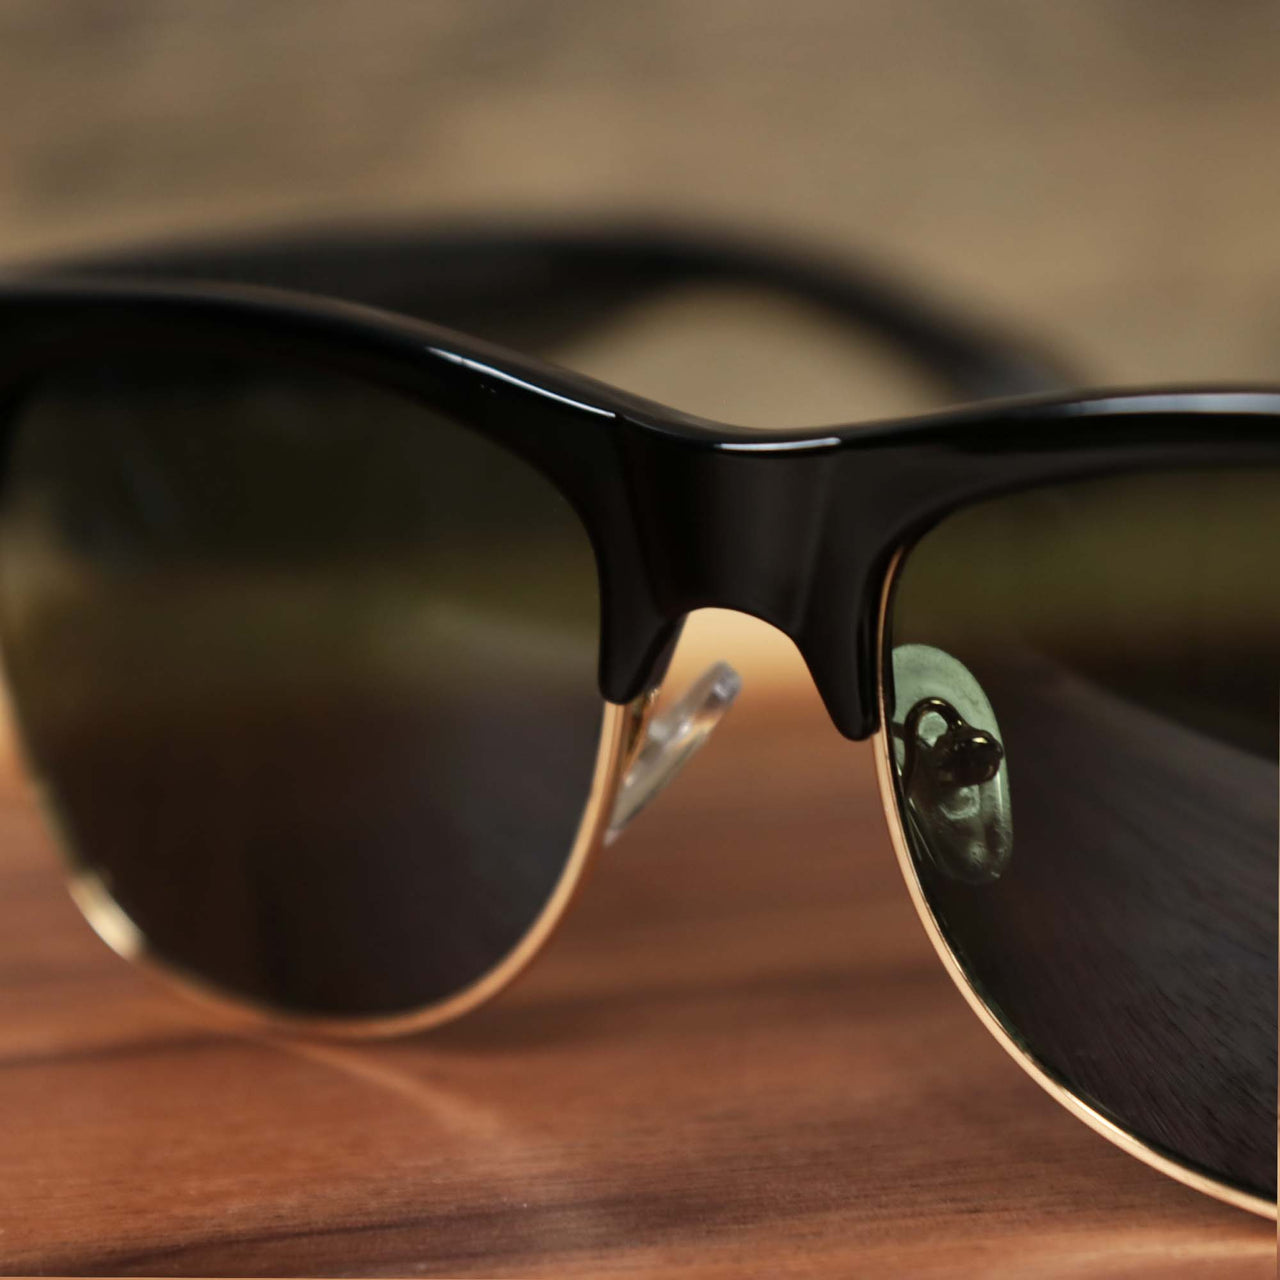 The bridge on the Thick Top and Metal Bottom Frame Black Gradient Lens Sunglasses with Black Frame